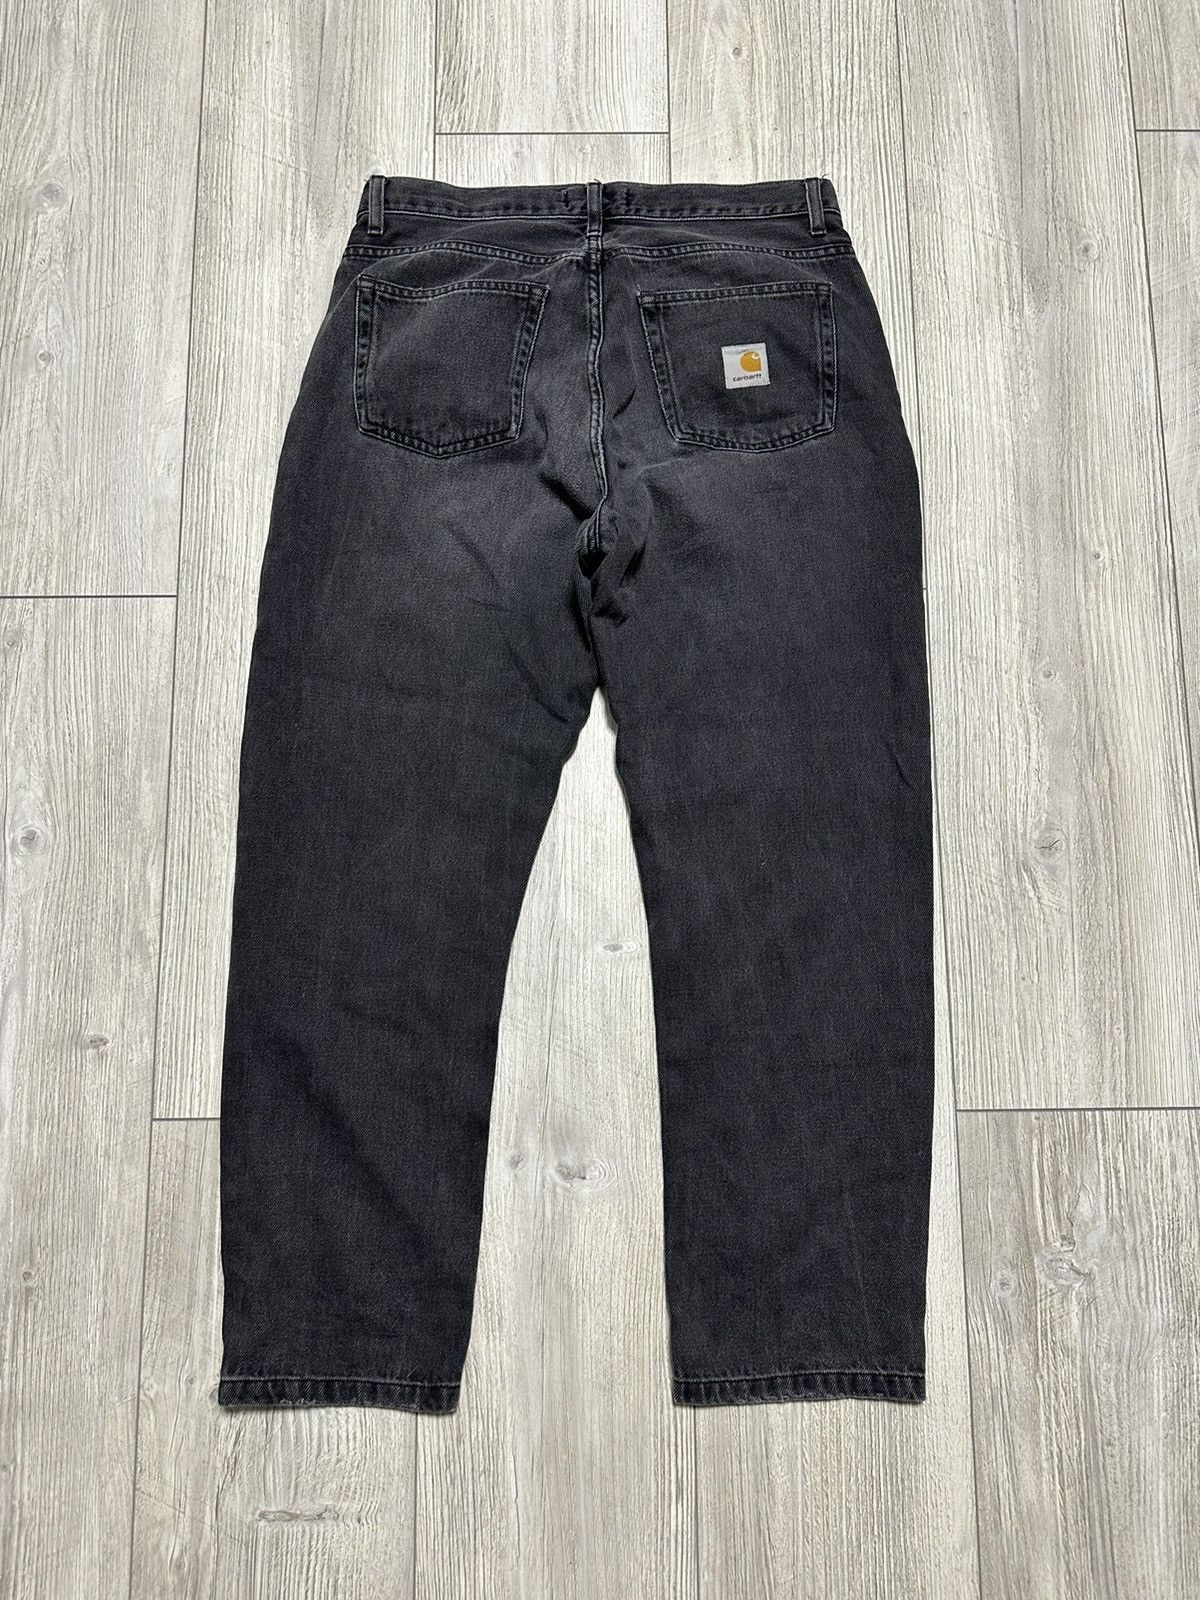 Pre-owned Carhartt X Vintage Carhartt Wip Page Carrot Ankle Pant Jeans Aviator In Black